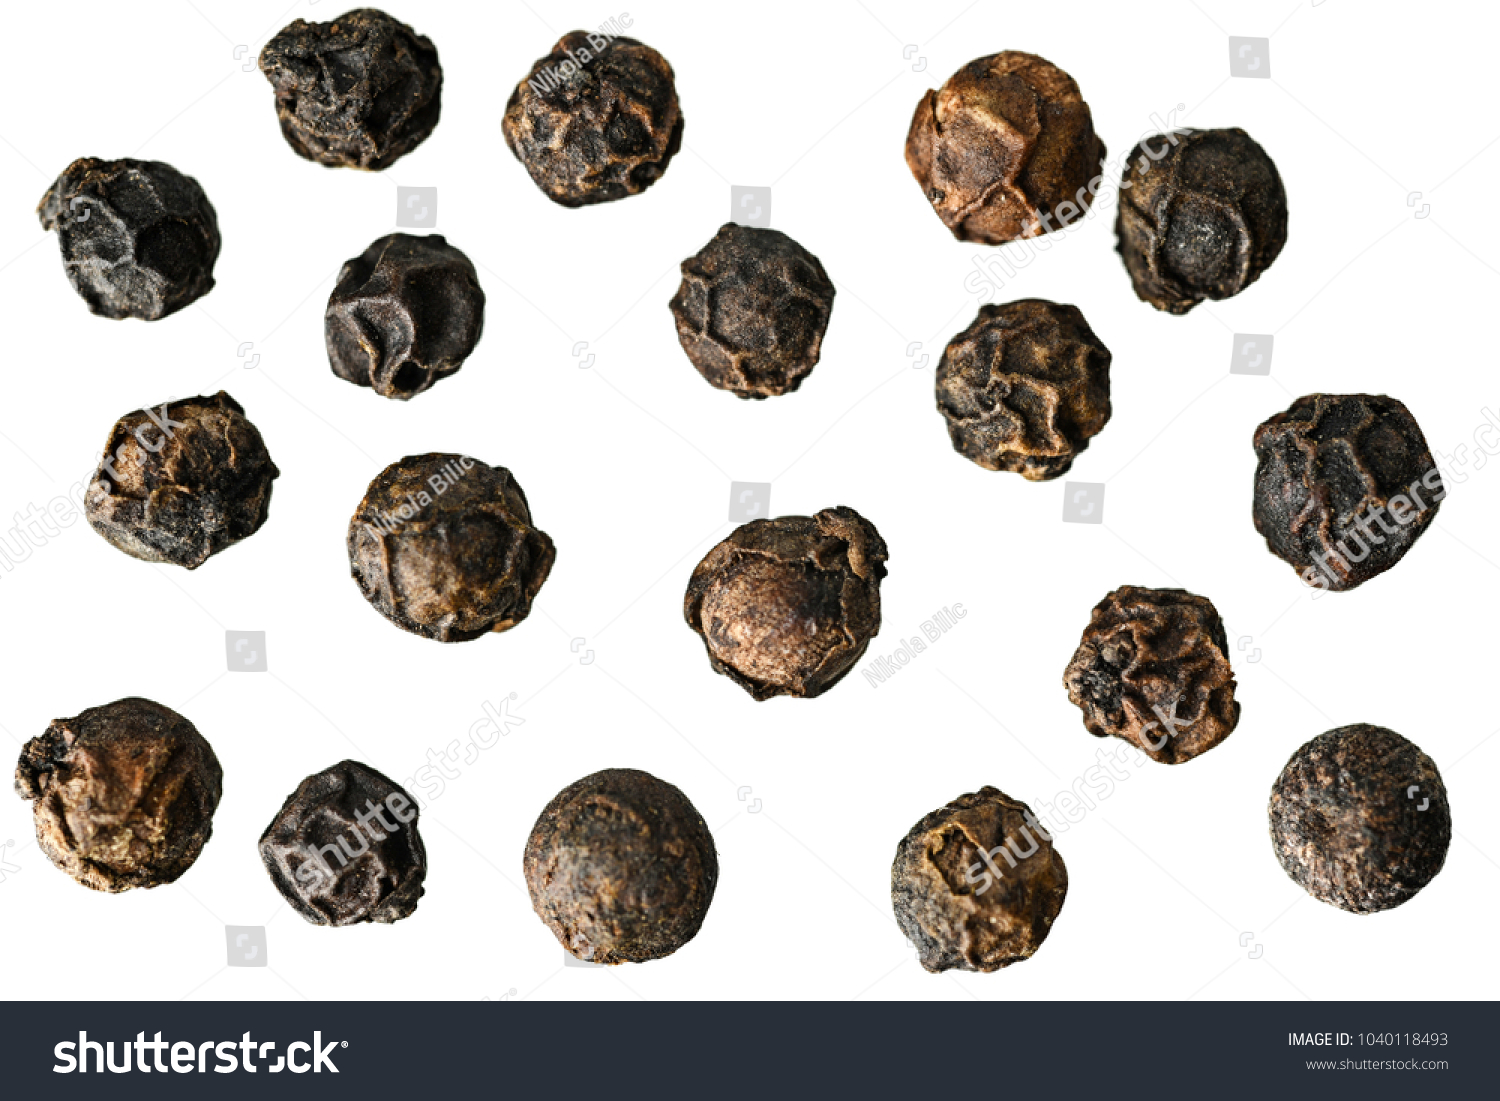 Close-up image of black pepper on white background, view above, no shadows #1040118493